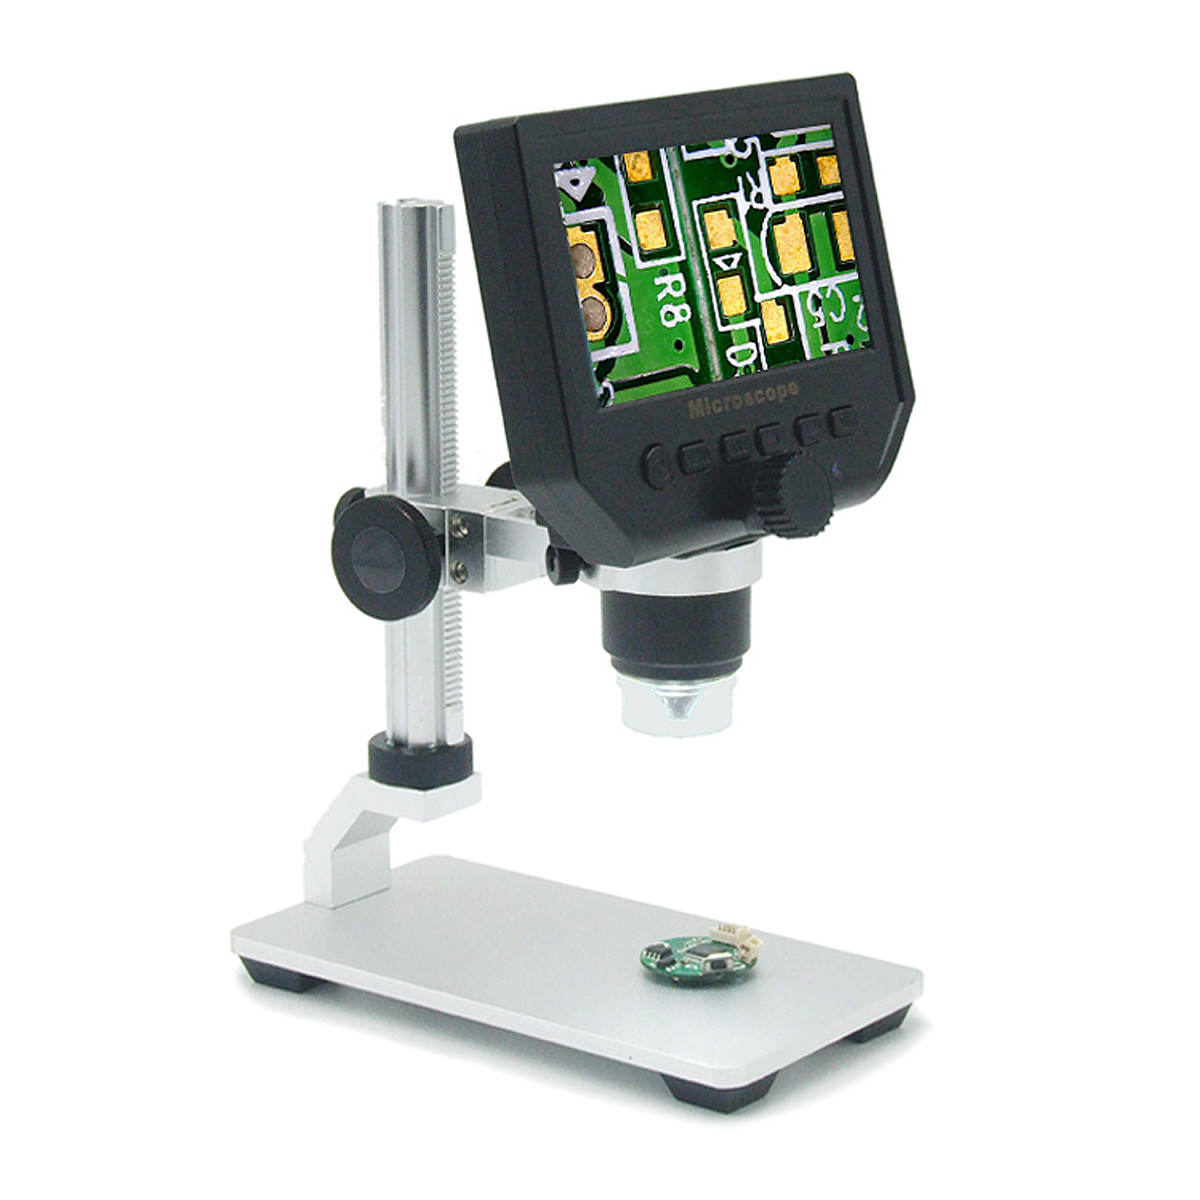 Mustool G600 Digital 1-600X 3.6MP 4.3inch HD LCD Display Microscope Continuous Magnifier with Aluminum Alloy Stand Upgrade Version 15